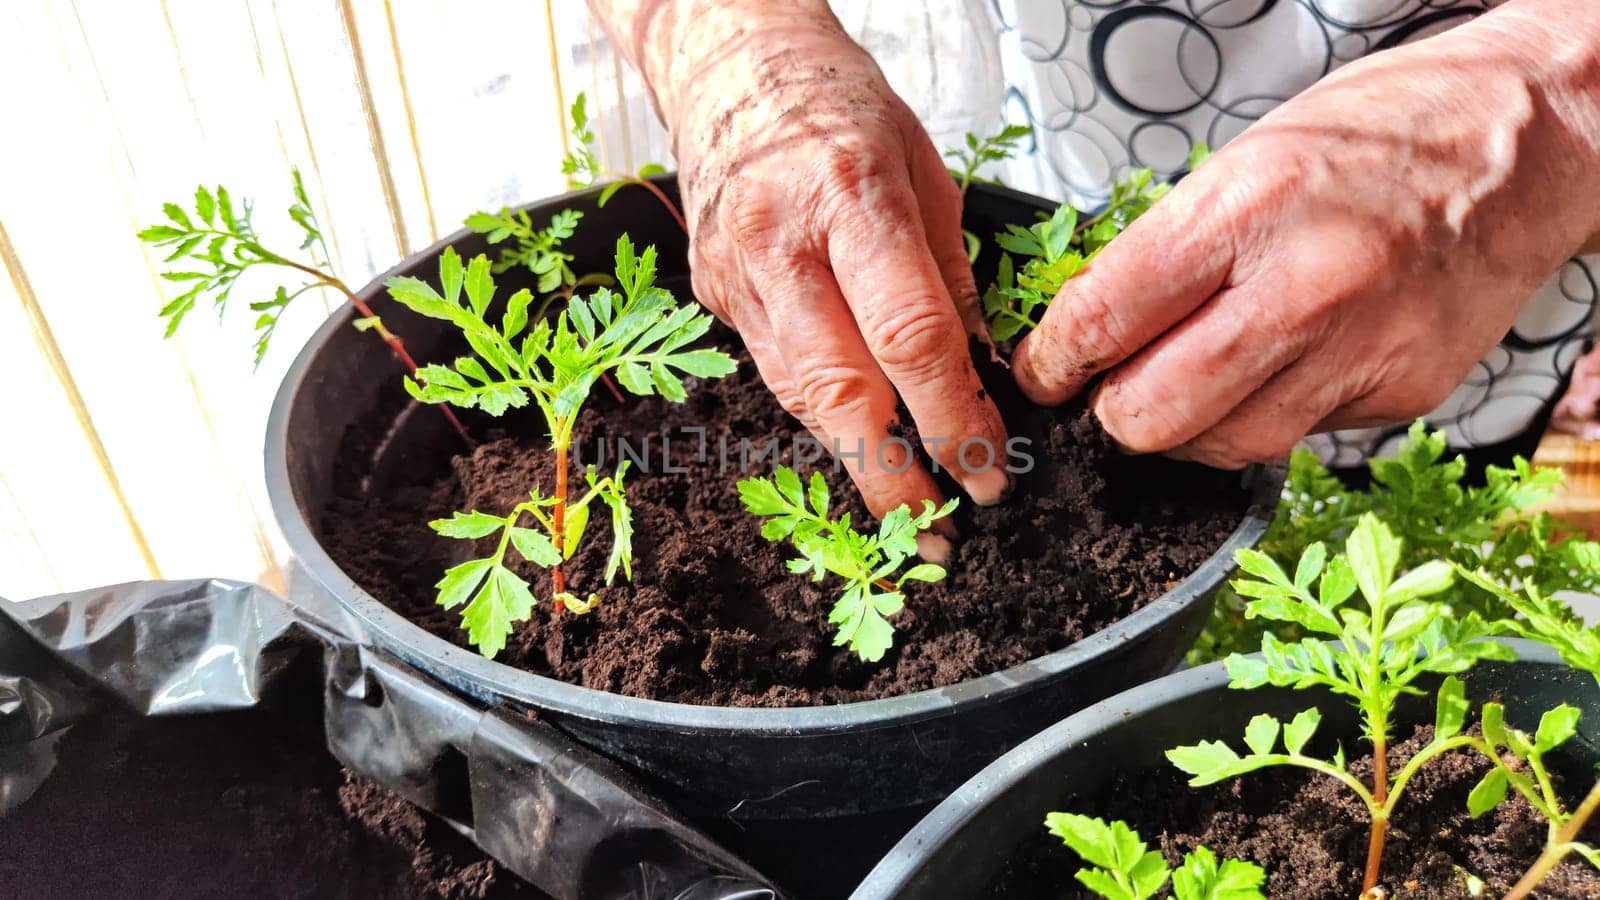 Planting marigold flowers in pot. Reproduction of plants in spring. Young flower shoots and greenery for garden. The hands of an elderly woman, a bucket of earth and green bushes and twigs with leaves by keleny